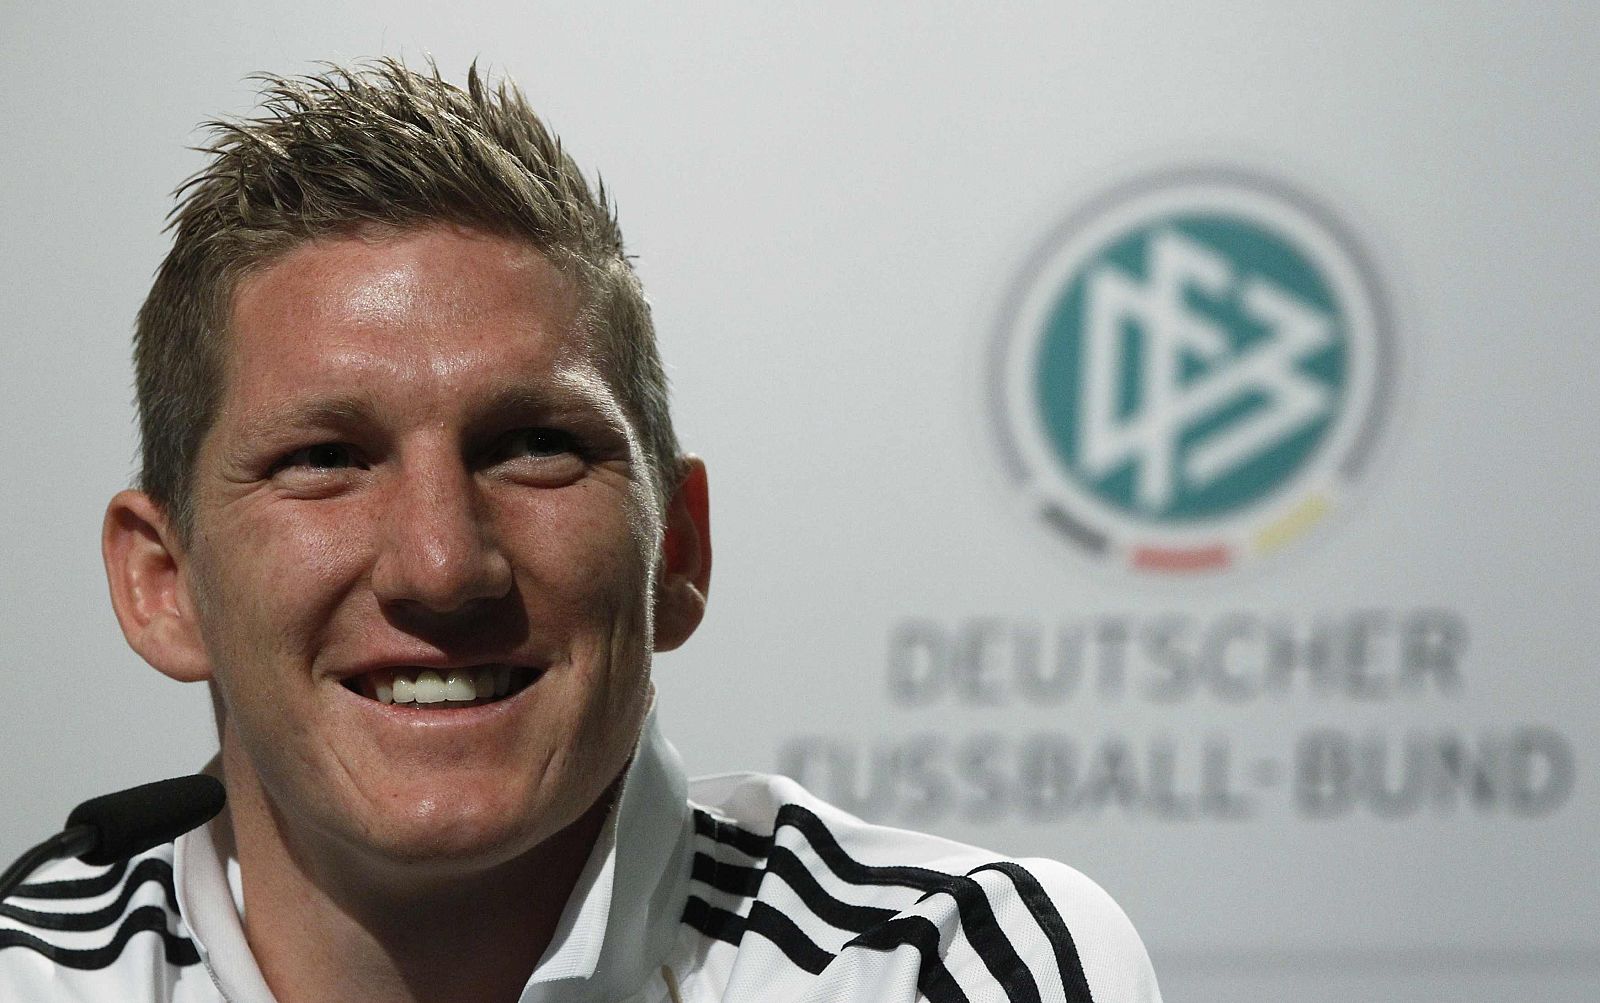 Germany's Schweinsteiger smiles during a news conference at the Velmore hotel in Pretoria